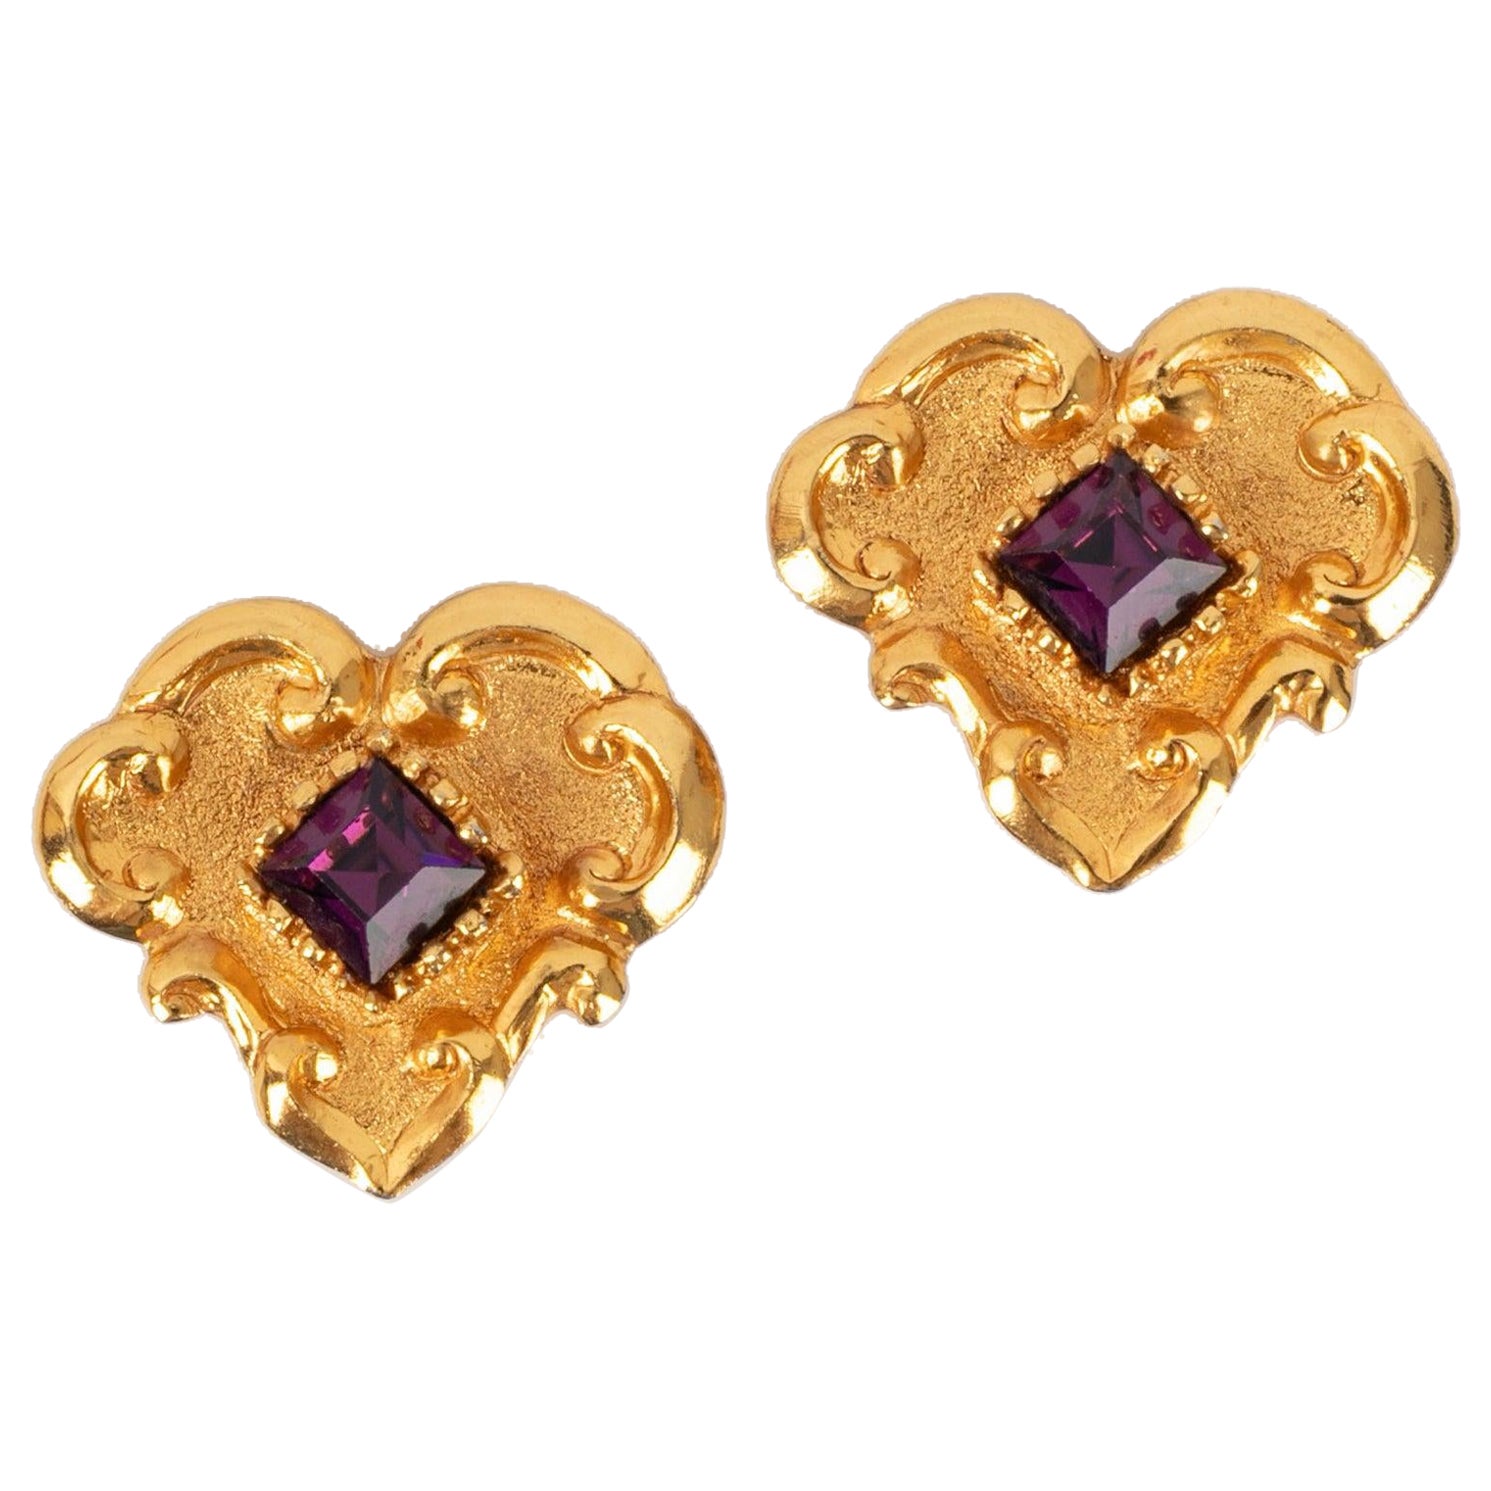 Christian Lacroix Golden Metal Earrings Topped with a Purple Rhinestone For Sale